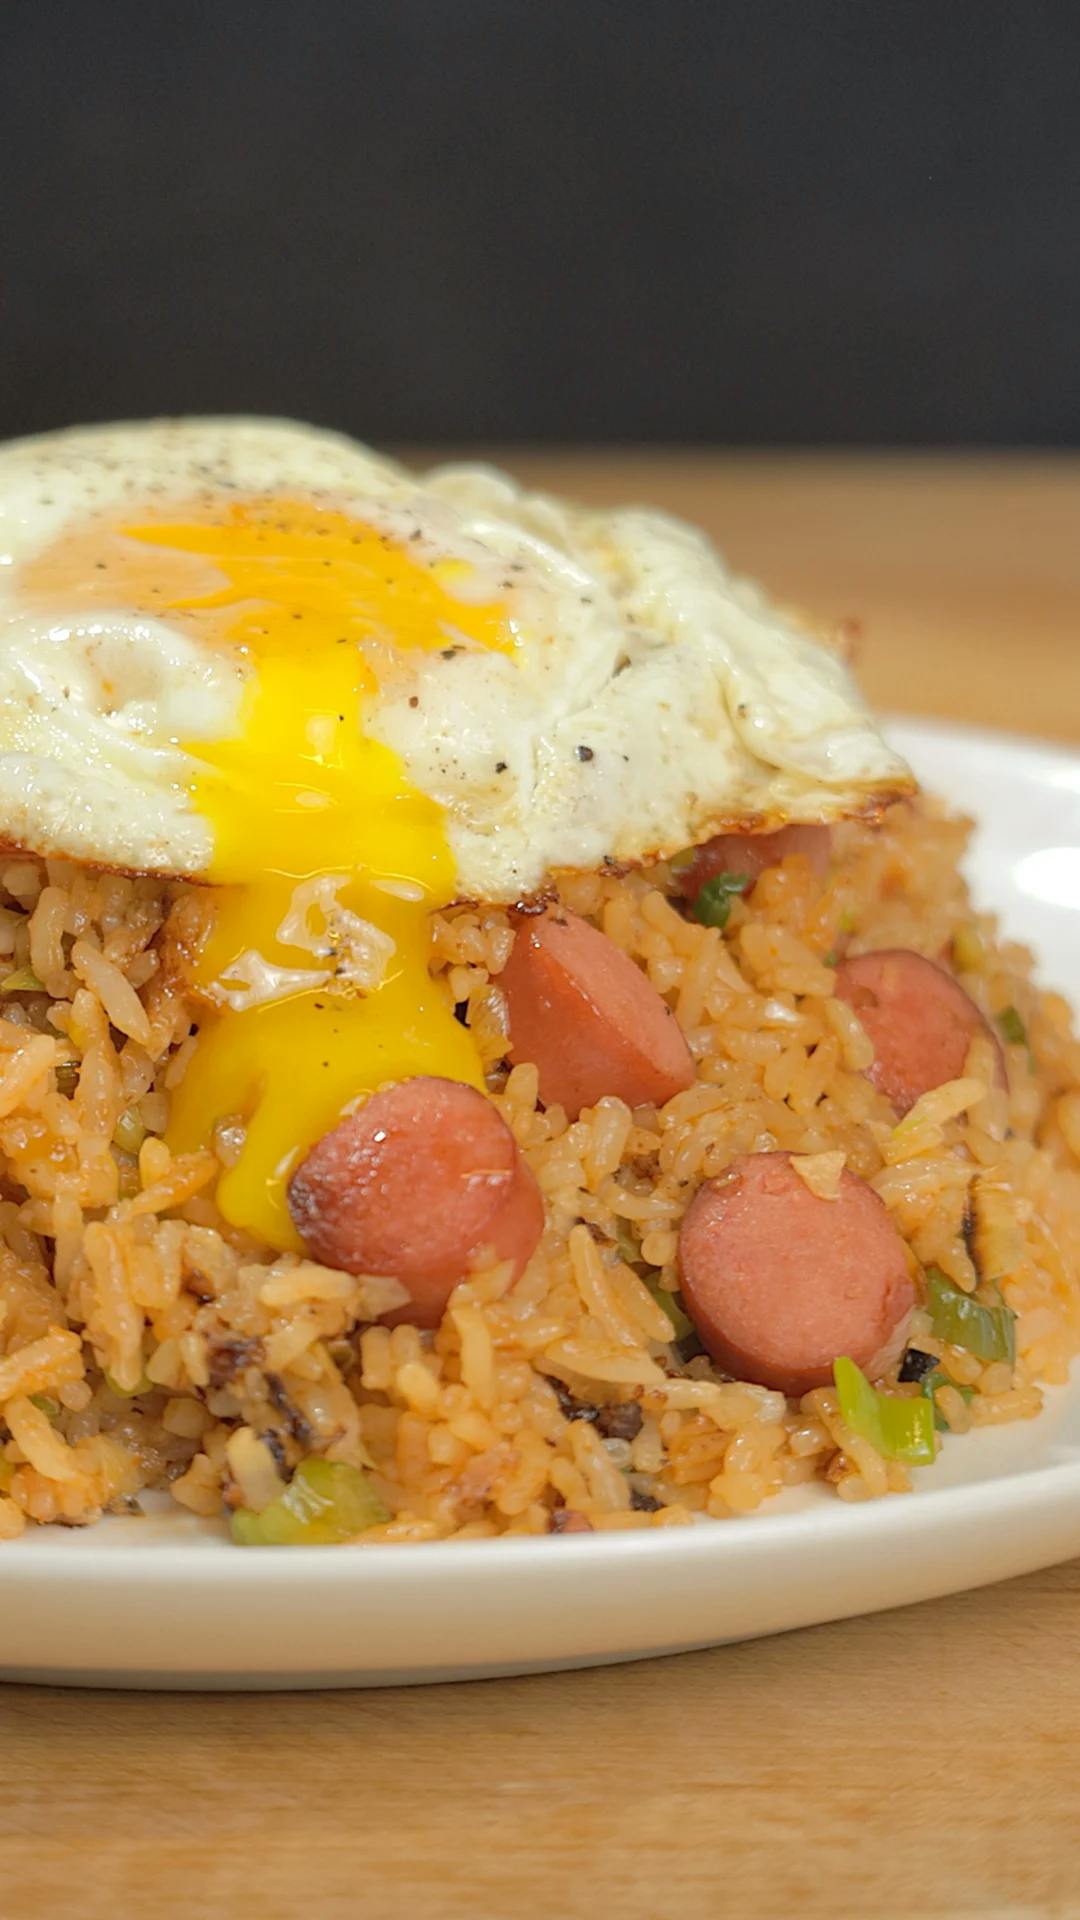 Picture for Arroz con Salchichas [Rice with Sausages]